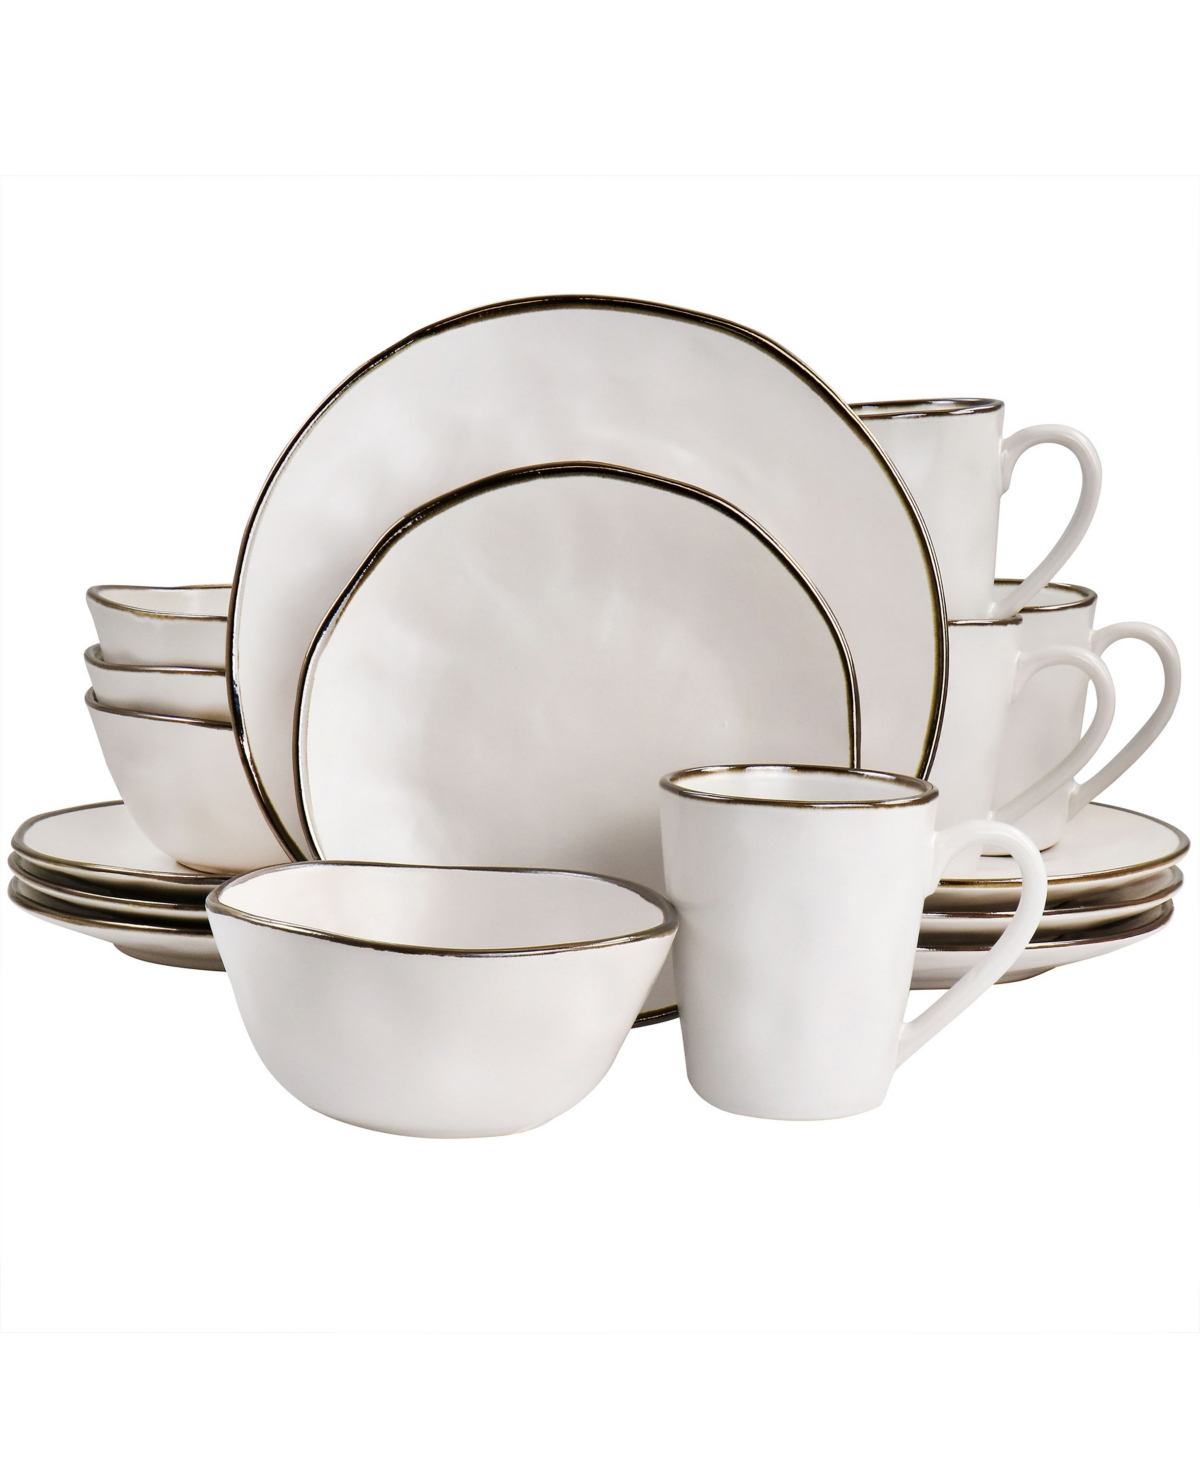 Textured, Uneven Dimpled Design Ricardo 16 Piece Stoneware Dinnerware Set, Service for 4 - Matte White with Gold-Tone Rim